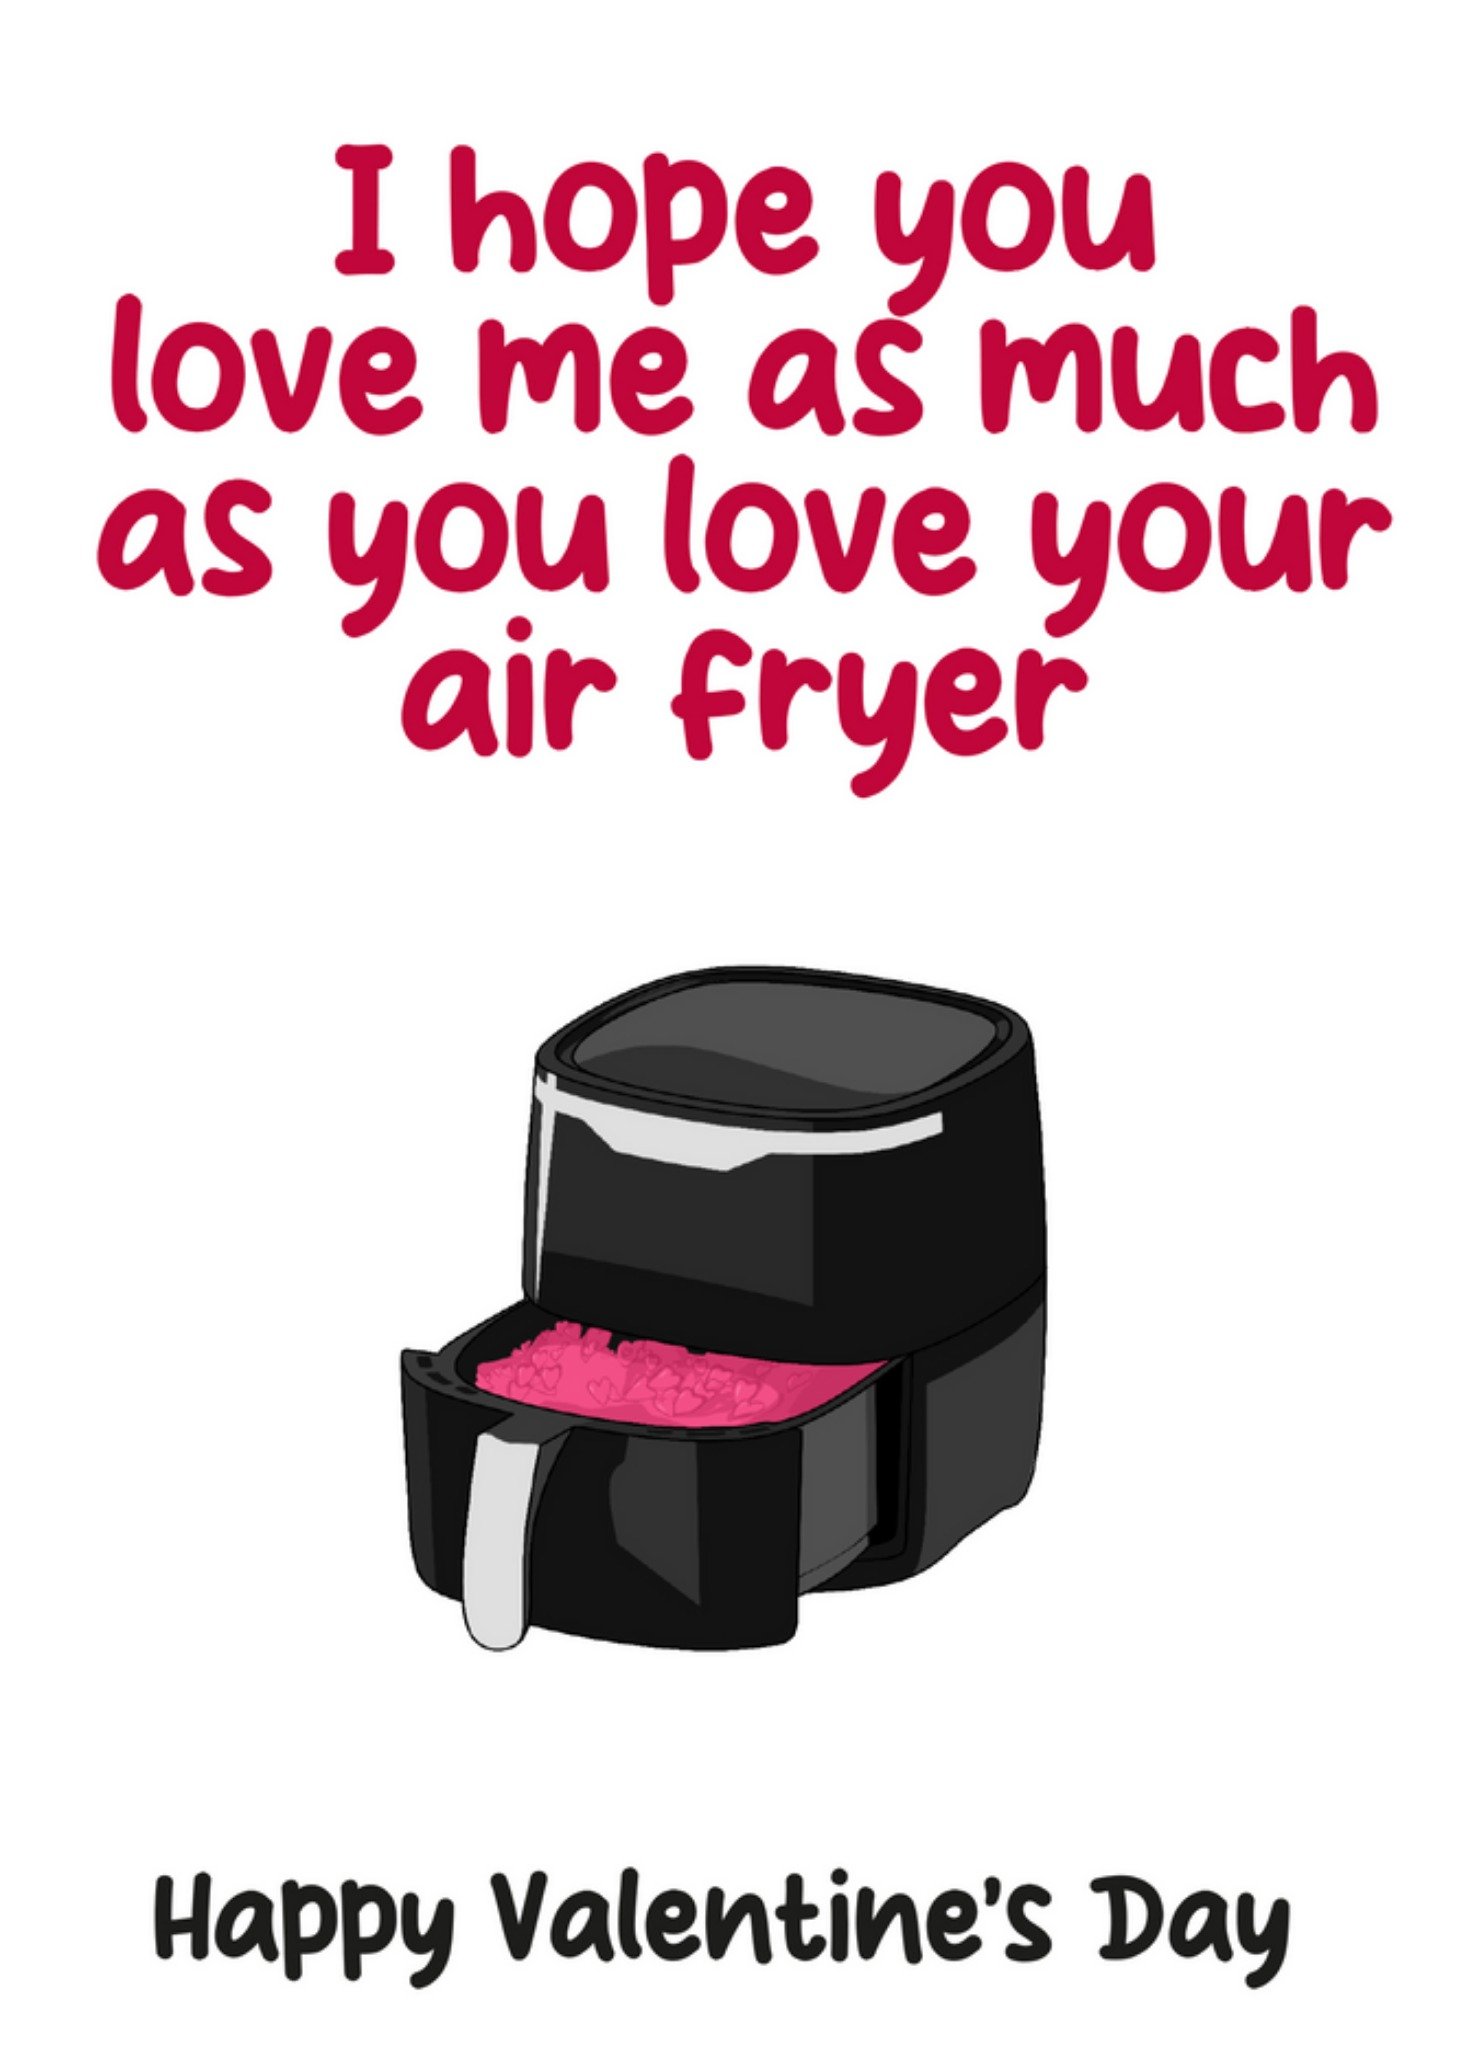 Moonpig I Hope You Love Me As Much As Your Air Fryer Valentine's Day Card Ecard